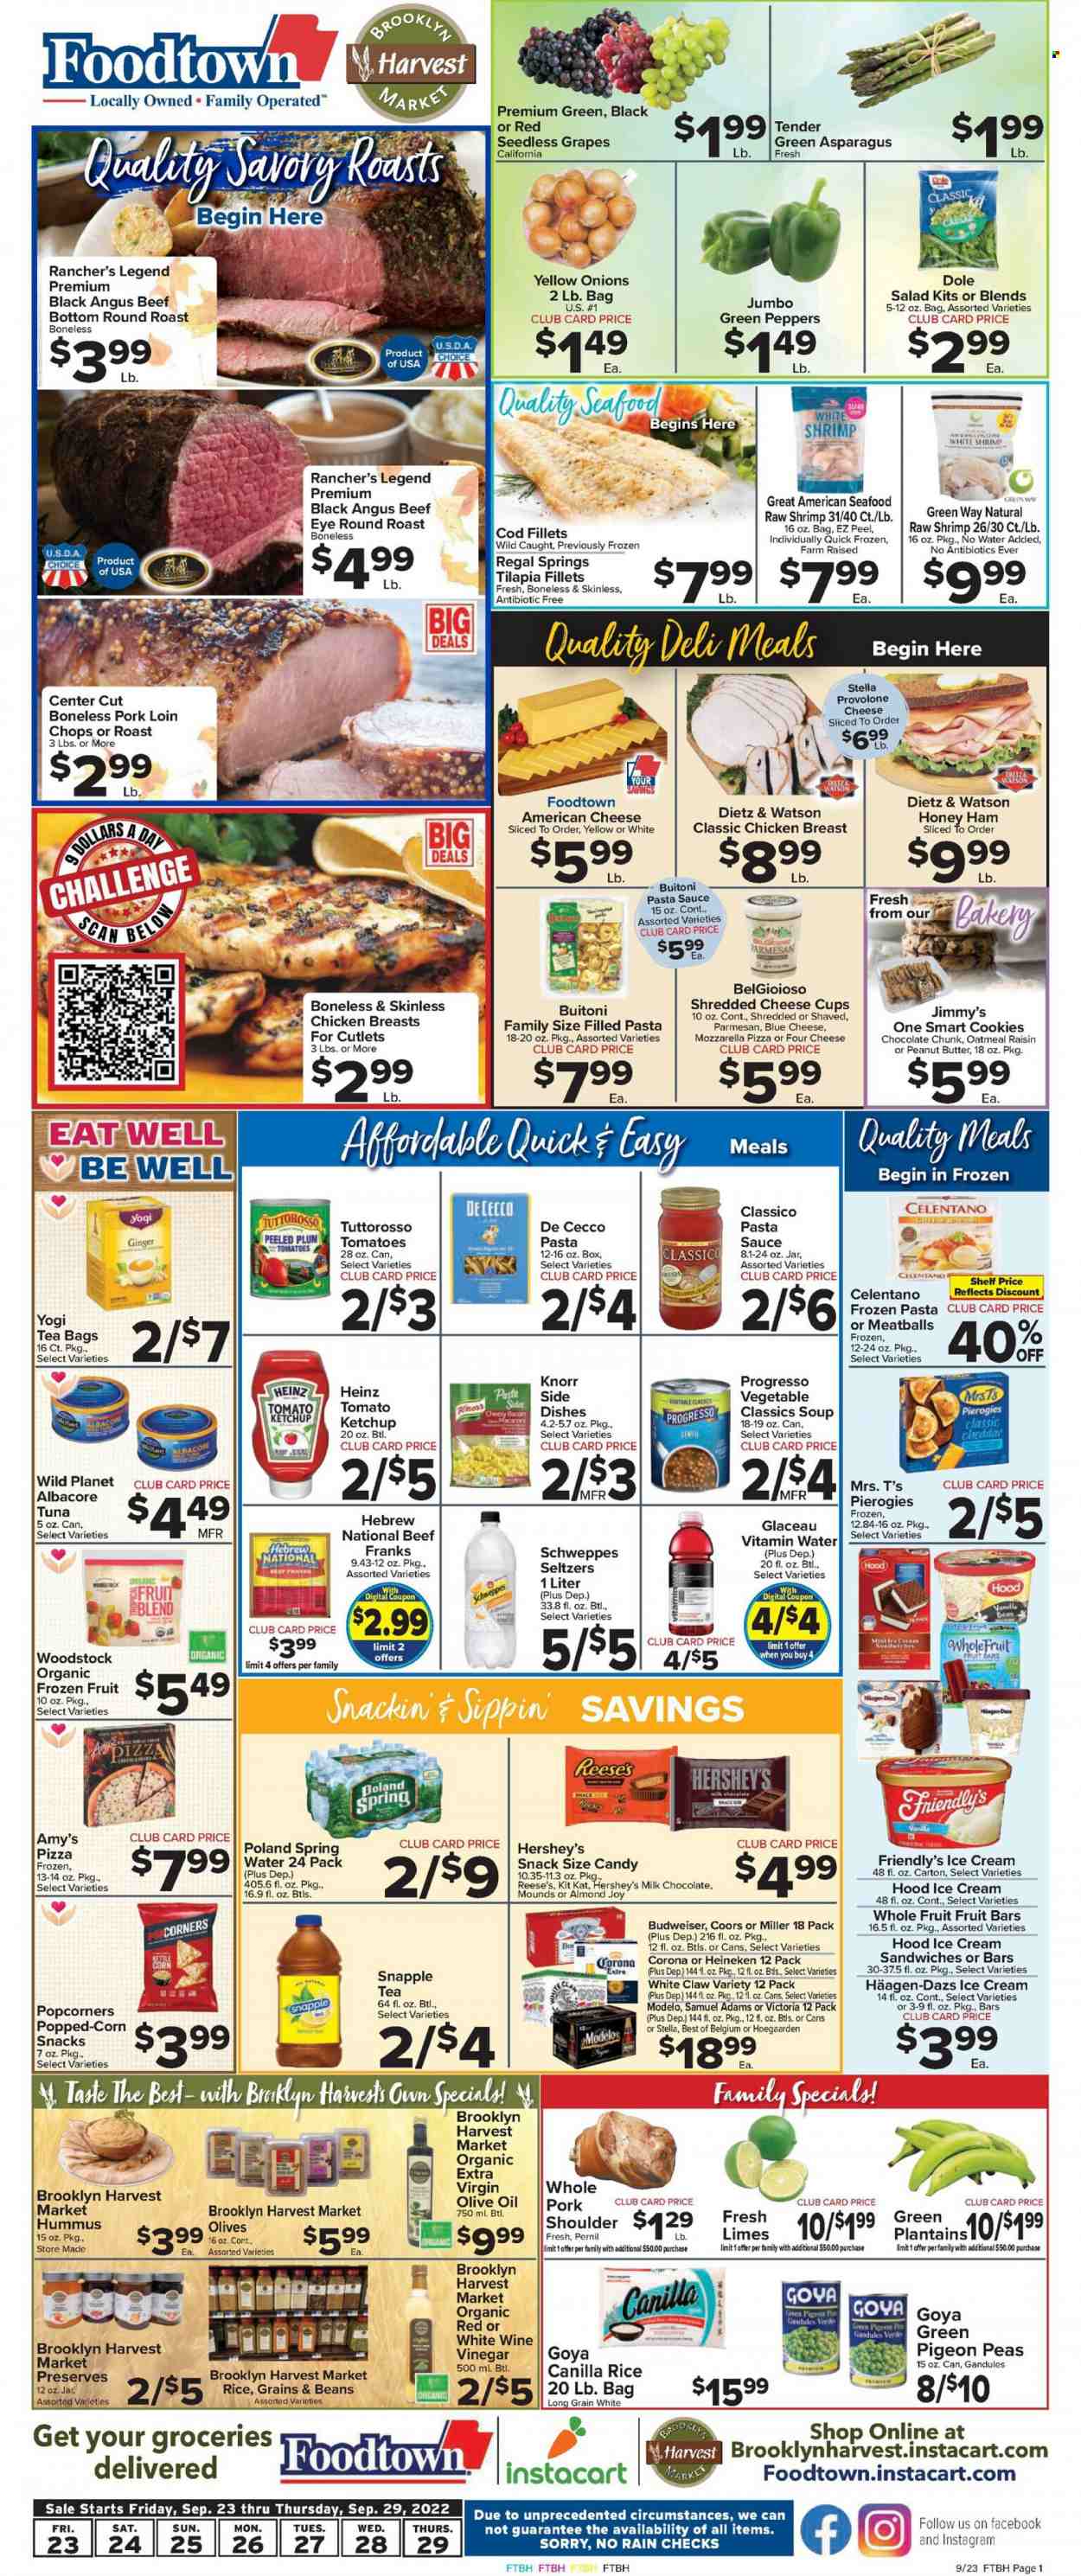 thumbnail - Foodtown Flyer - 09/23/2022 - 09/29/2022 - Sales products - asparagus, beans, ginger, salad greens, peas, onion, snack, salad, Dole, green pepper, grapes, limes, seedless grapes, plantains, cod, fish fillets, tilapia, tuna, shrimps, pizza, pasta sauce, meatballs, soup, Knorr, sauce, Progresso, Buitoni, filled pasta, roast, ready meal, chicken breasts, Dietz & Watson, frankfurters, hummus, pâté, american cheese, shredded cheese, sliced cheese, cheese cup, parmesan, Provolone, ice cream, ice cream sandwich, Reese's, Hershey's, Häagen-Dazs, Friendly's Ice Cream, fruit bar, organic frozen fruit, frozen fruit, milk chocolate, KitKat, Candy, sweets, maize snack, salty snack, oatmeal, canned tomatoes, Heinz, Goya, toor dal, ketchup, extra virgin olive oil, vinegar, wine vinegar, olive oil, oil, Schweppes, ice tea, Snapple, electrolyte drink, spring water, vitamin water, water, tea bags, White Claw, Hard Seltzer, beer, Budweiser, Corona Extra, Heineken, Modelo, eye of round, round roast, pork chops, pork loin, pork meat, Pigeon, Coors. Page 1.